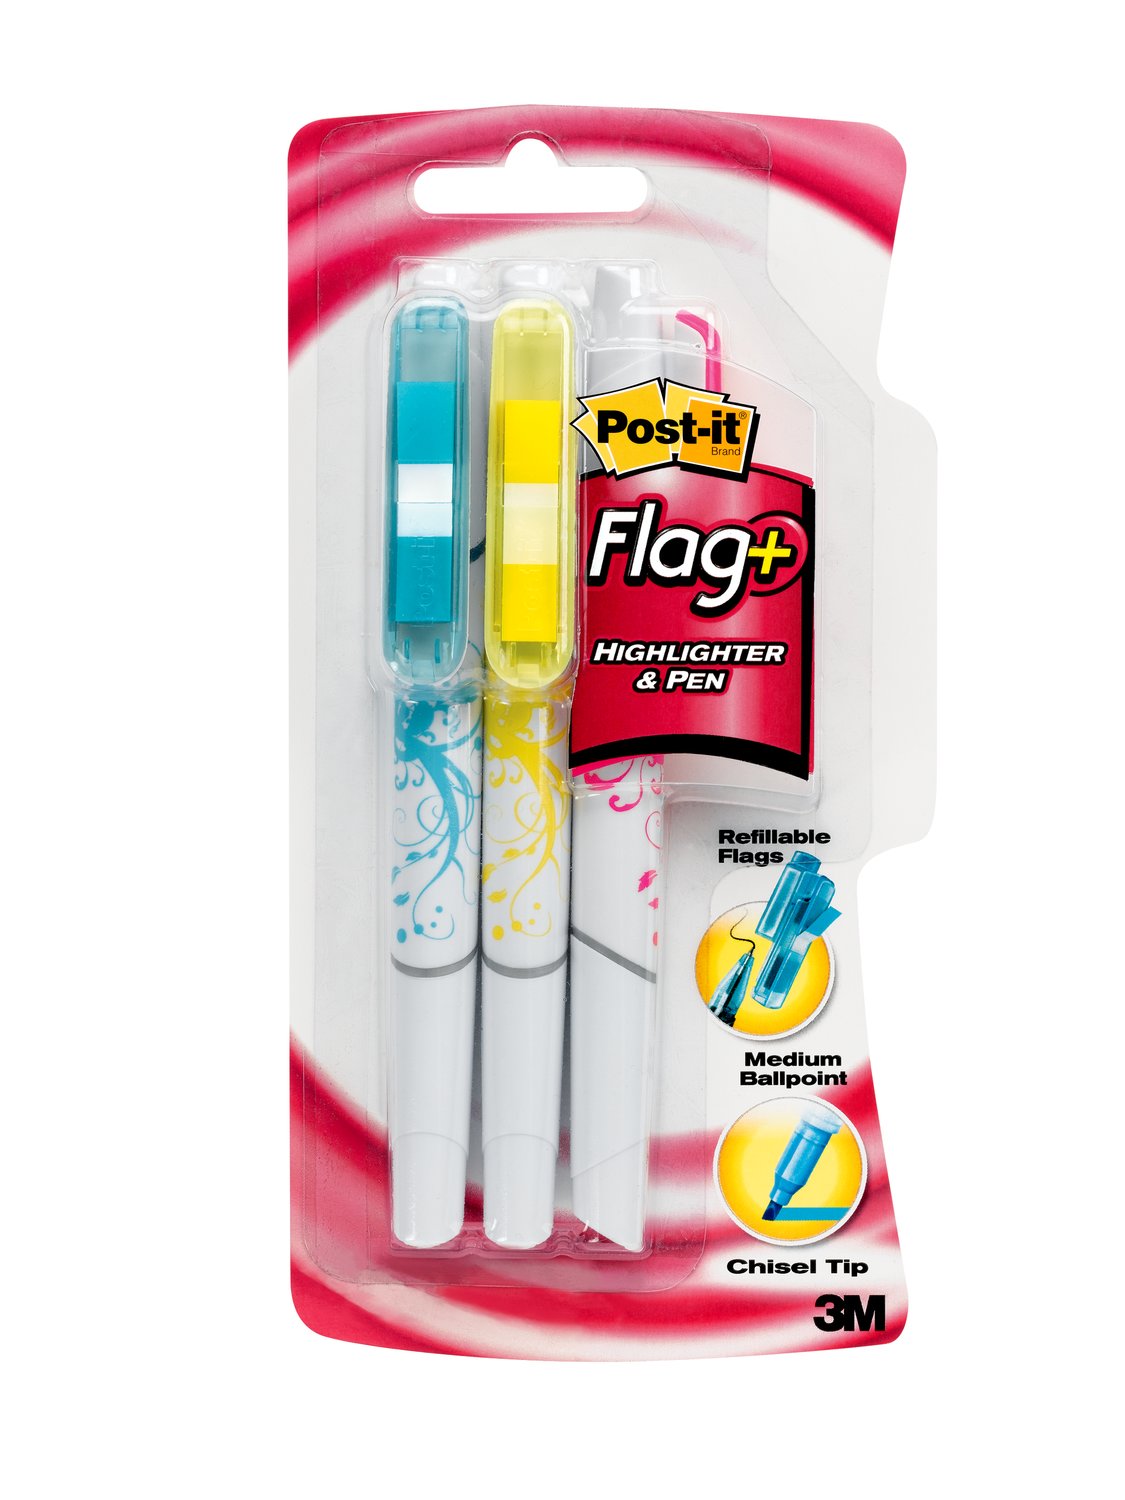 7010332609 - Post-it Flag+ Pen and Highlighter 691-HLP3